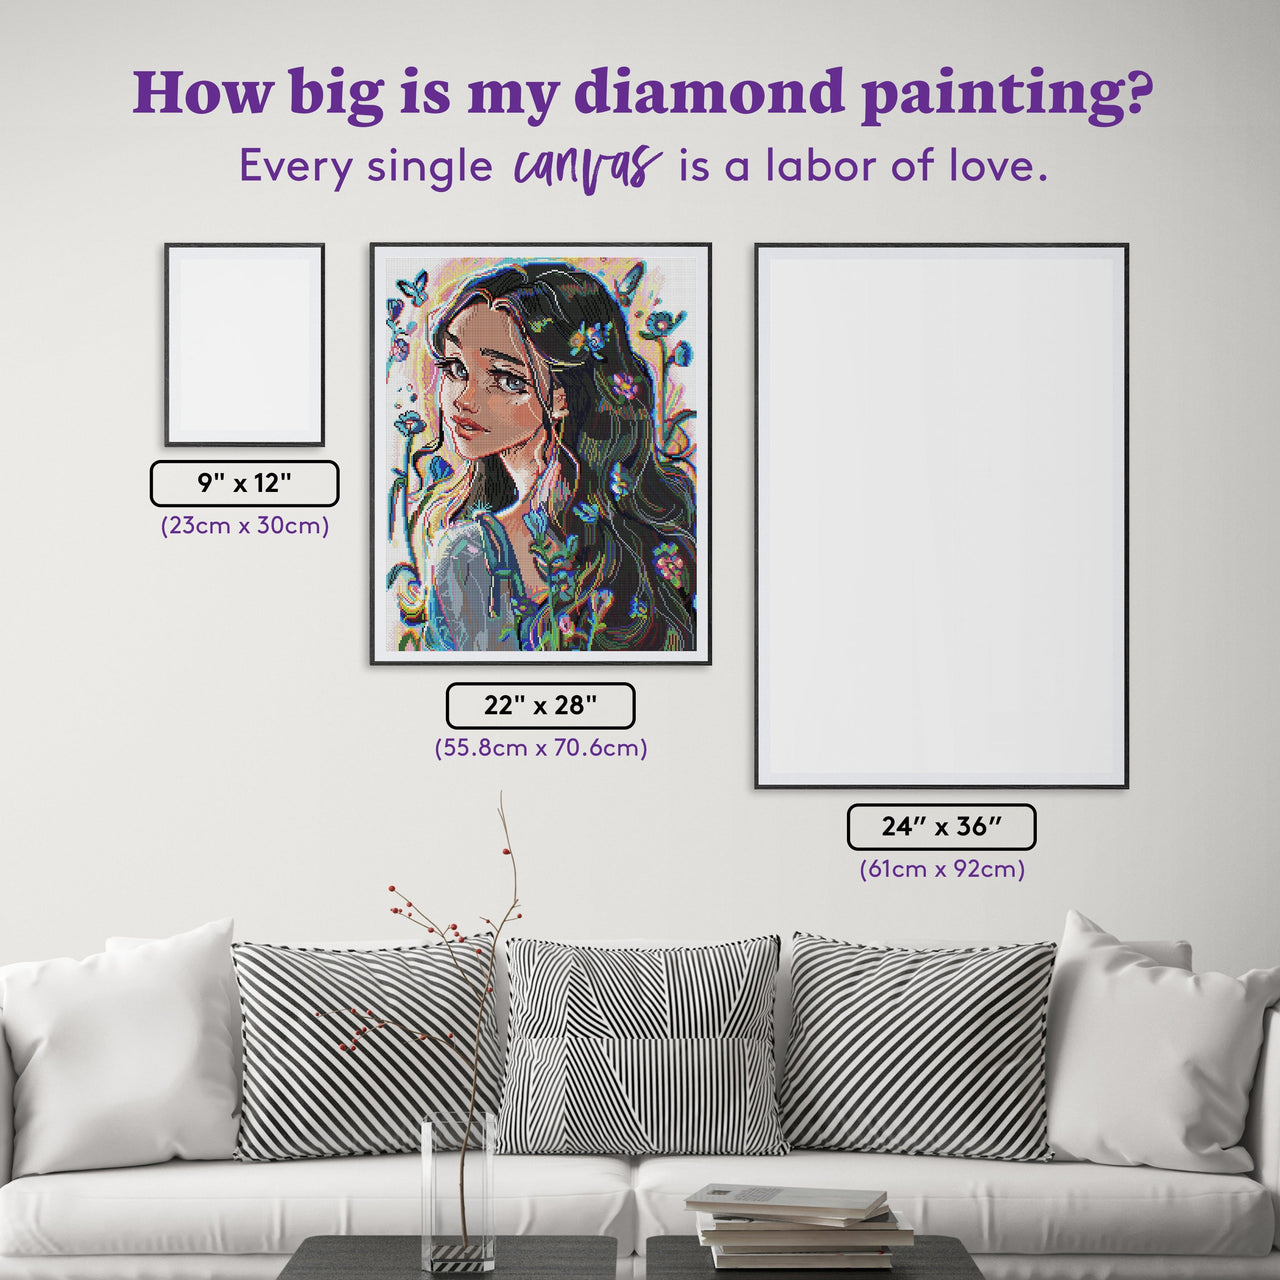 Diamond Painting Springtime Blossoms 22" x 28" (55.8cm x 70.6cm) / Round with 65 Colors including 3 ABs and 2 Fairy Dust Diamonds / 50,148